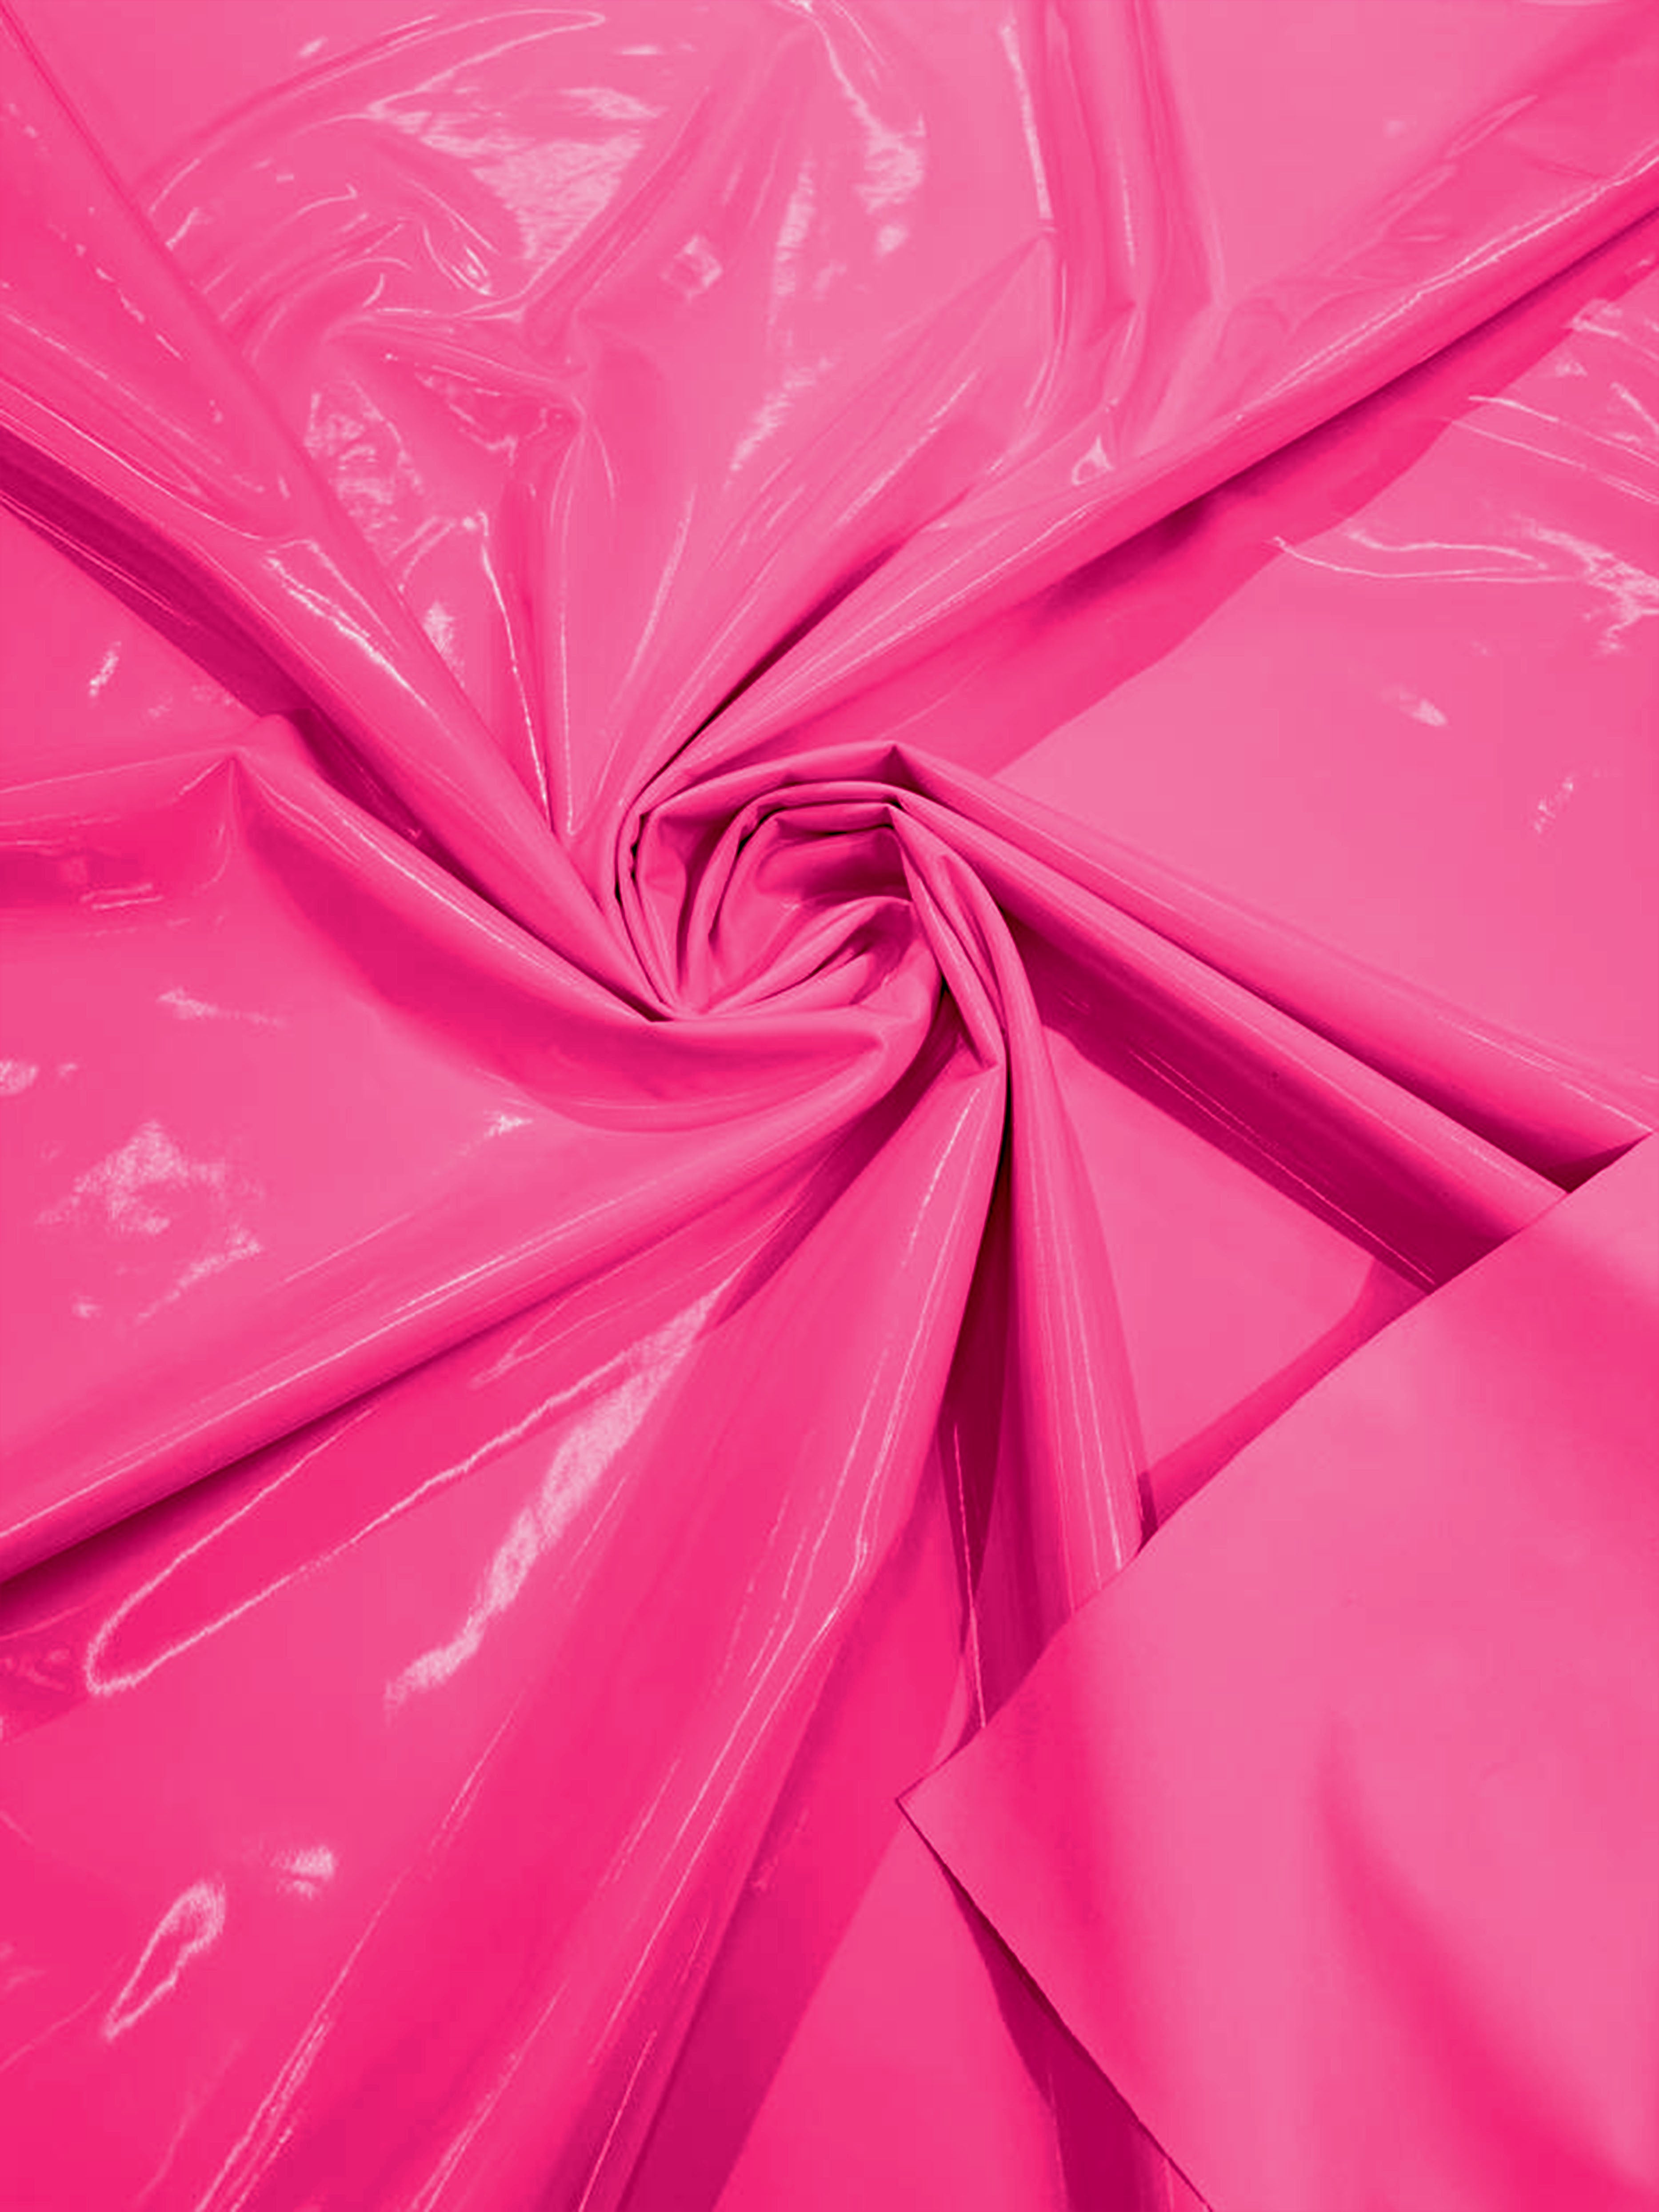 Hot Pink Spandex Shiny Vinyl Fabric (Latex Stretch) - Sold By The Yard